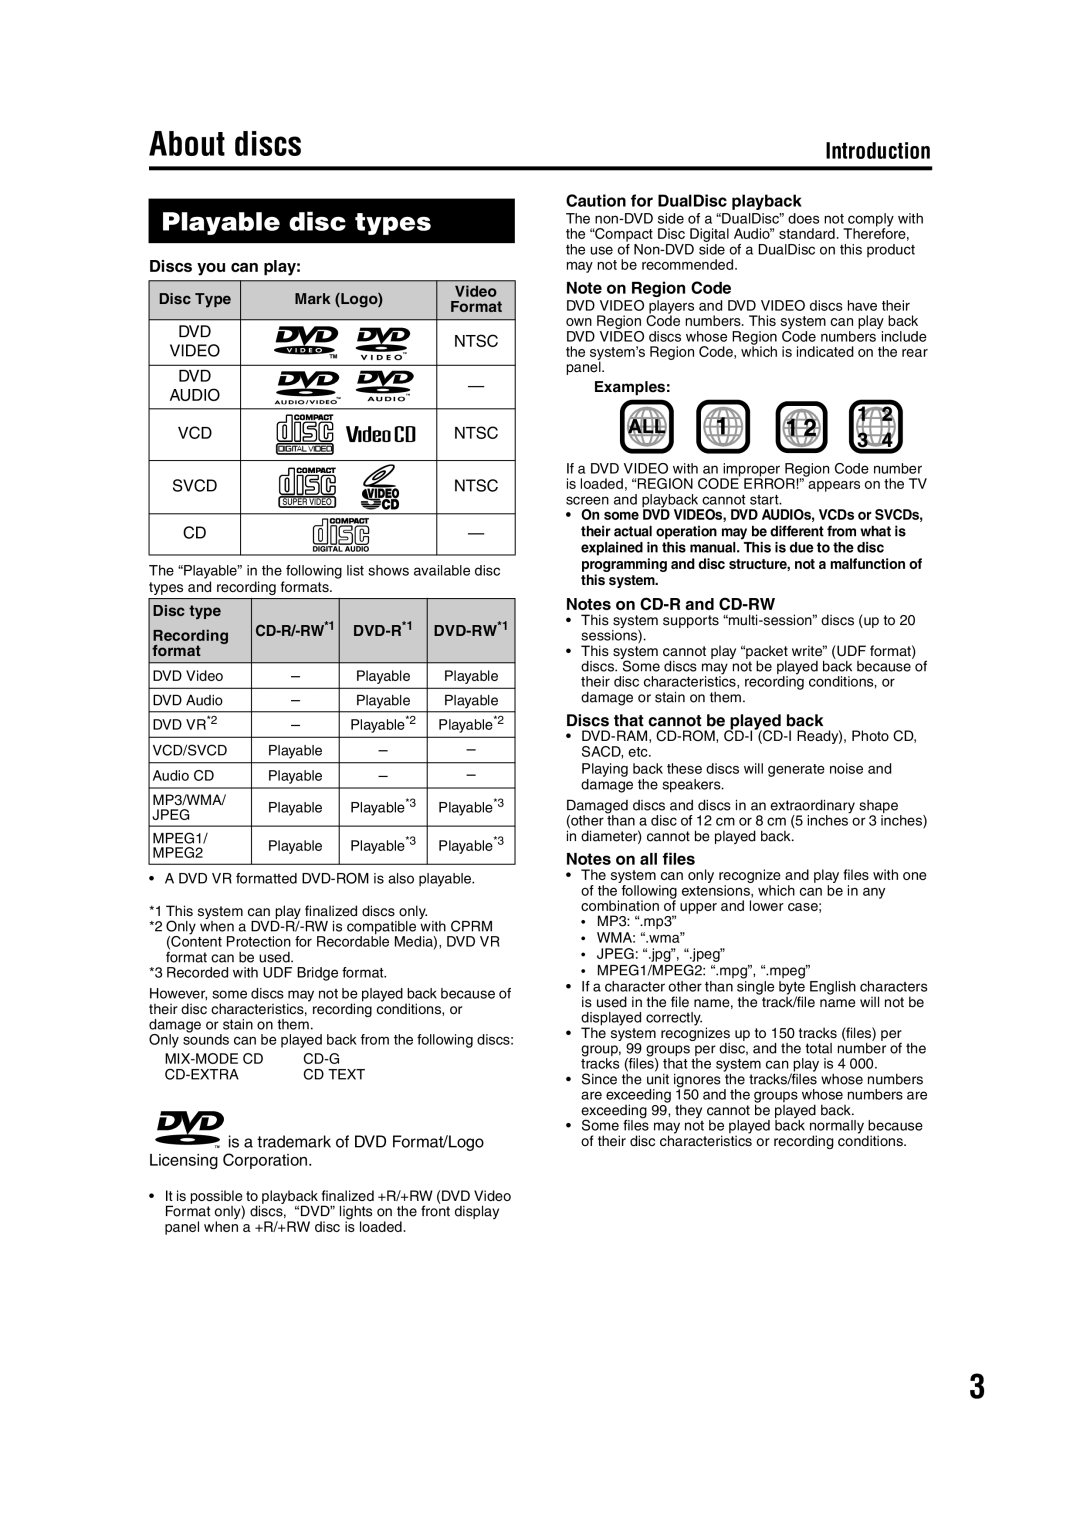 JVC GNT0066-001A manual About discs, Playable disc types, Introduction, Discs you can play, Caution for DualDisc playback 